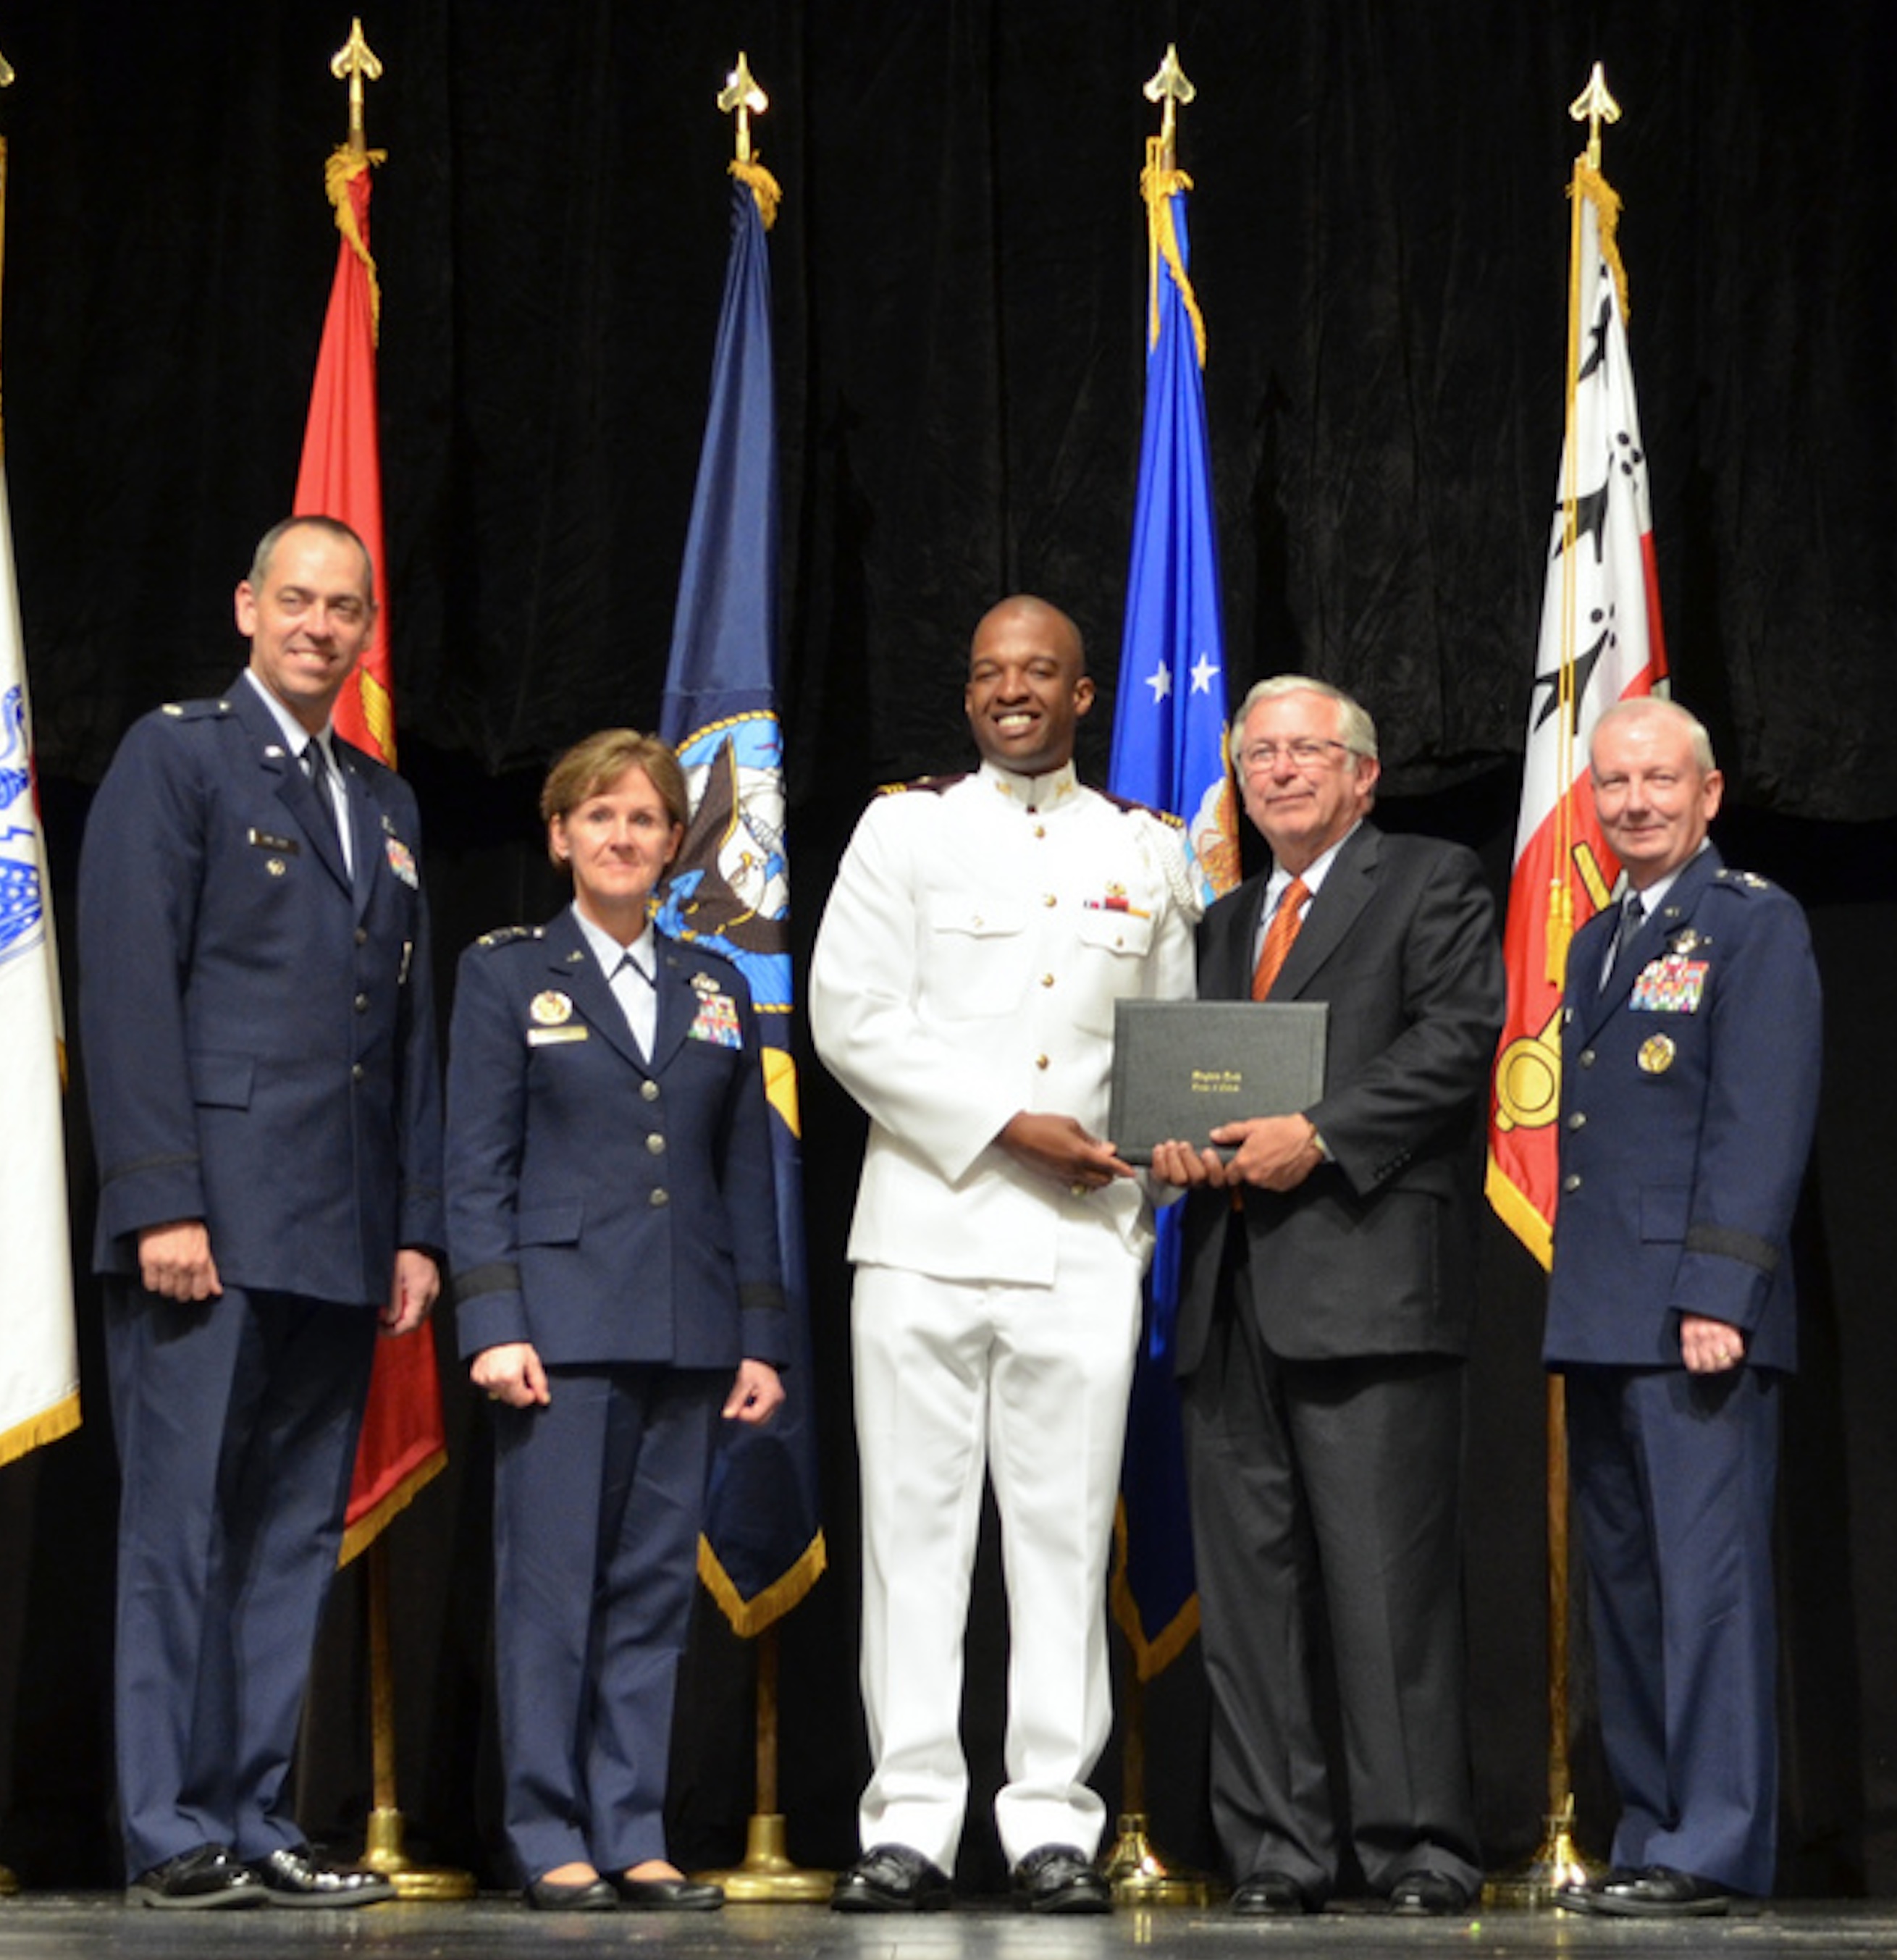 President Charles W. Steger awards a graduation certificate from the Corps of Cadets to Kareim Oliphant last May in the Burruss Hall auditorium.